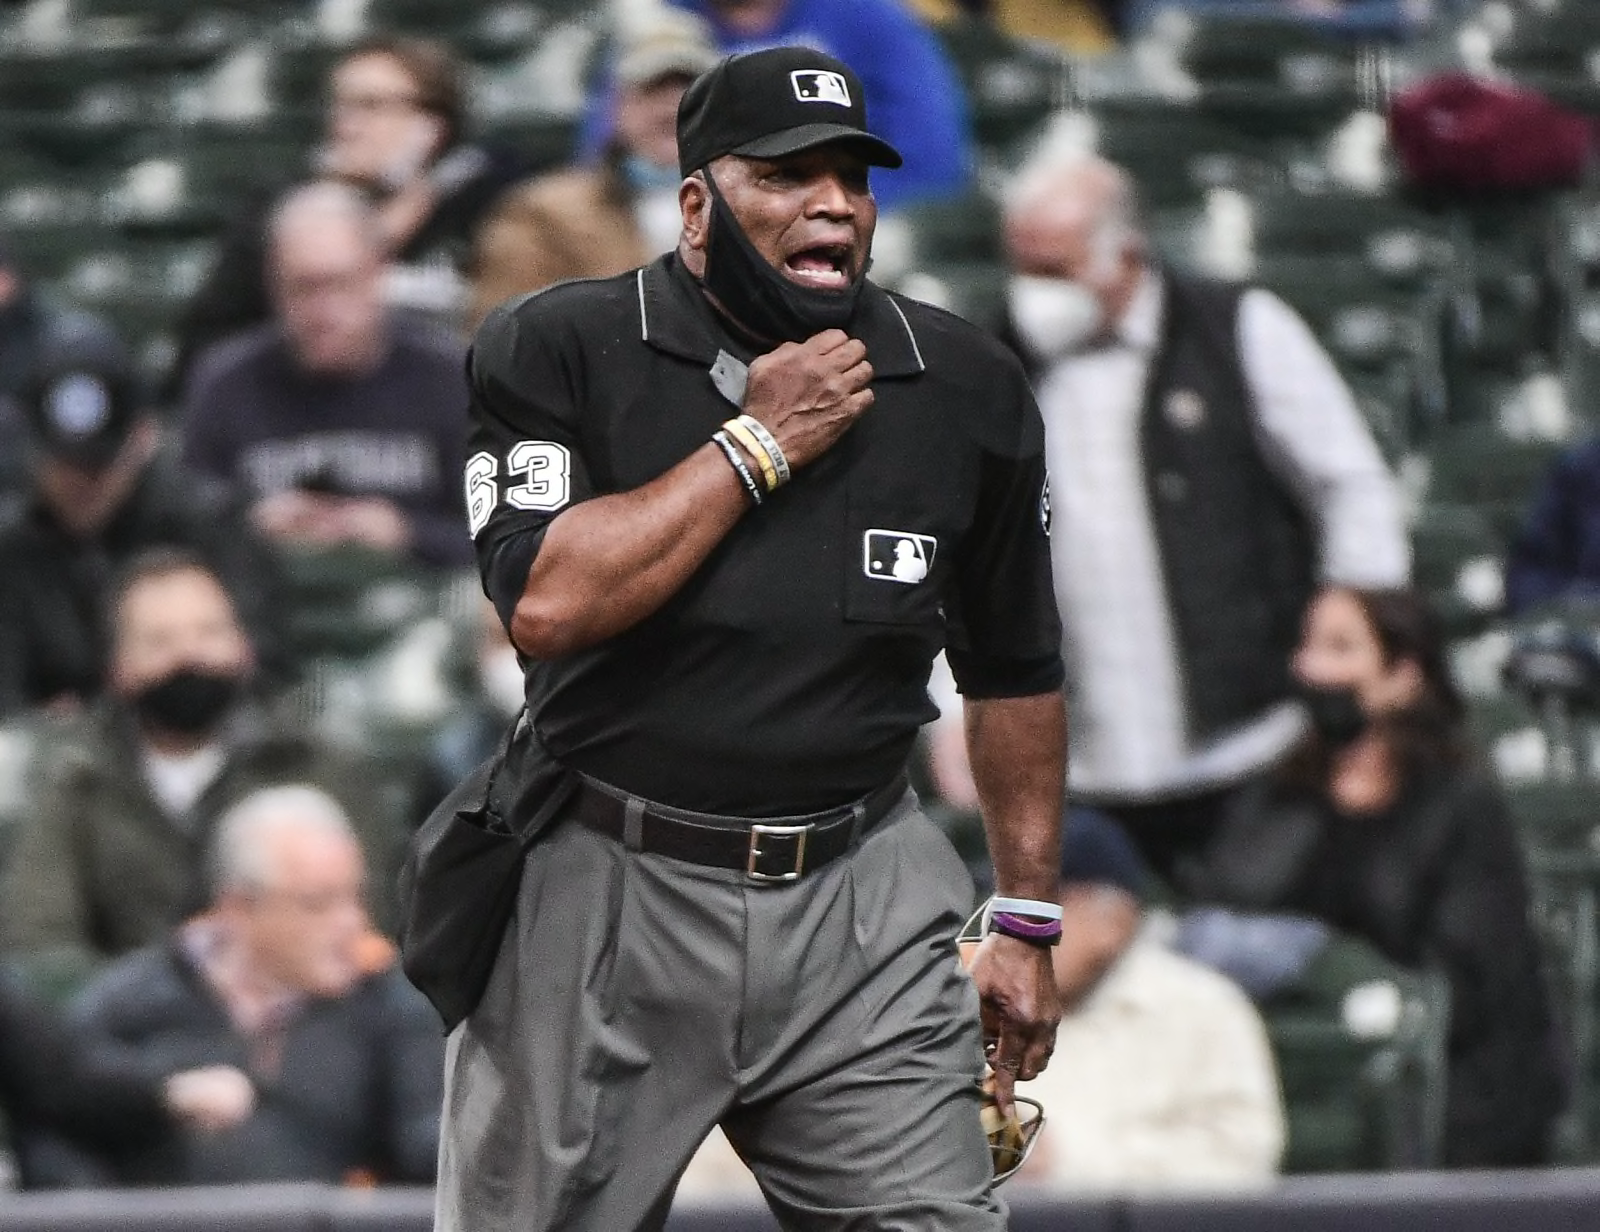 The five worst MLB umpires in the game today